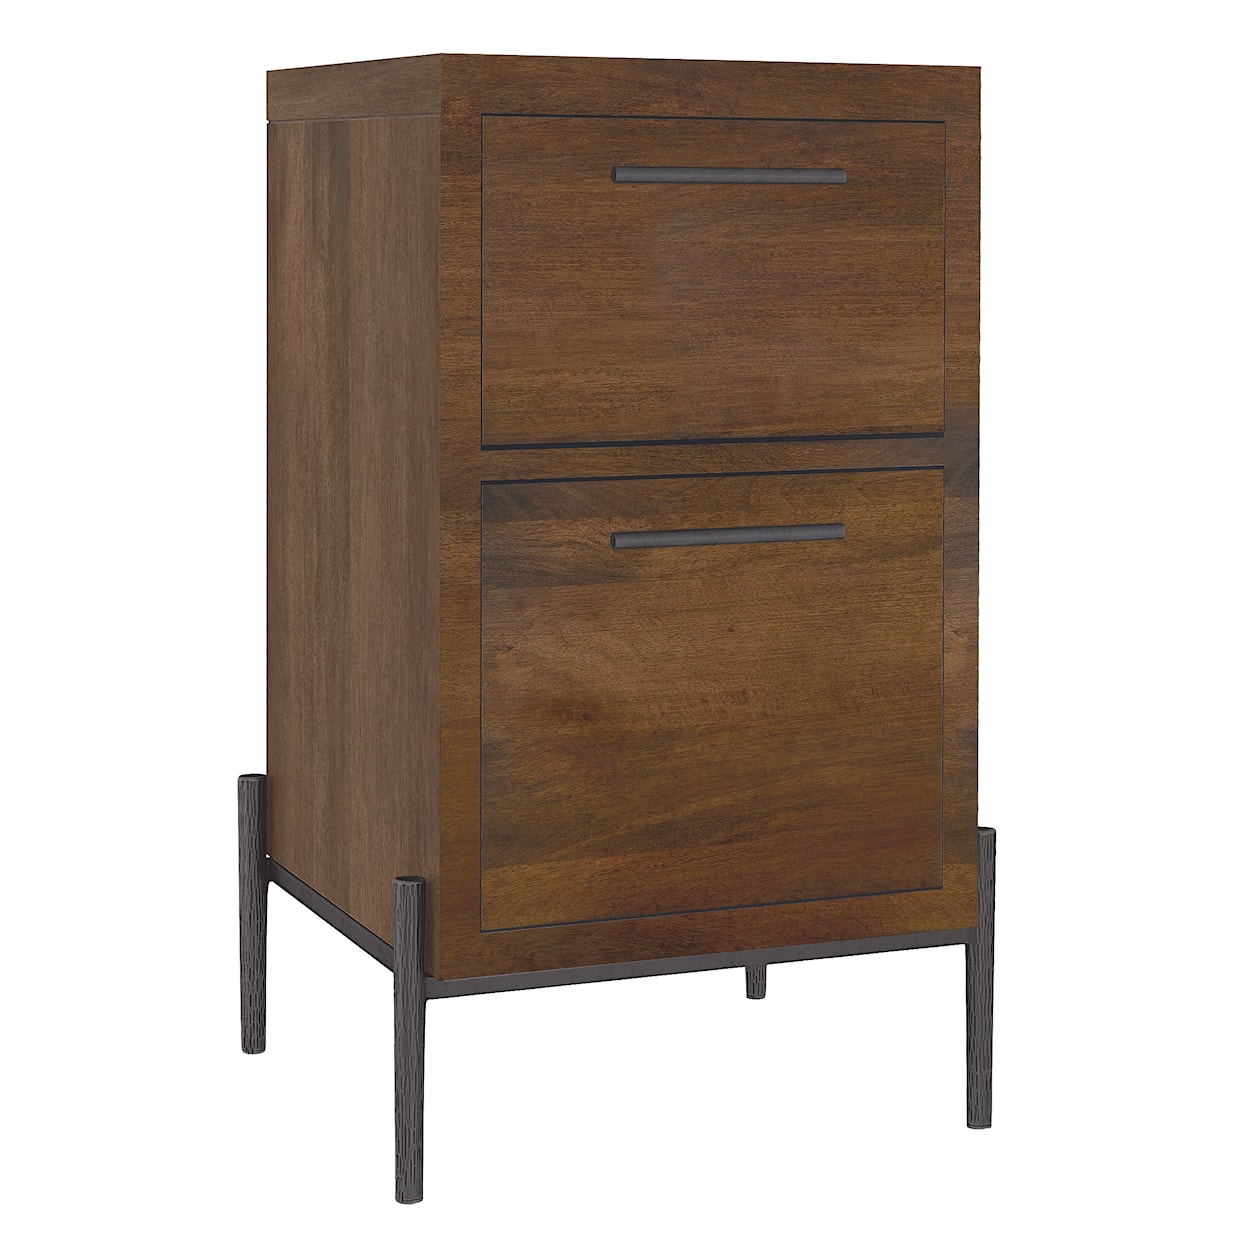 Hekman Bedford Park Two-Drawer File Cabinet